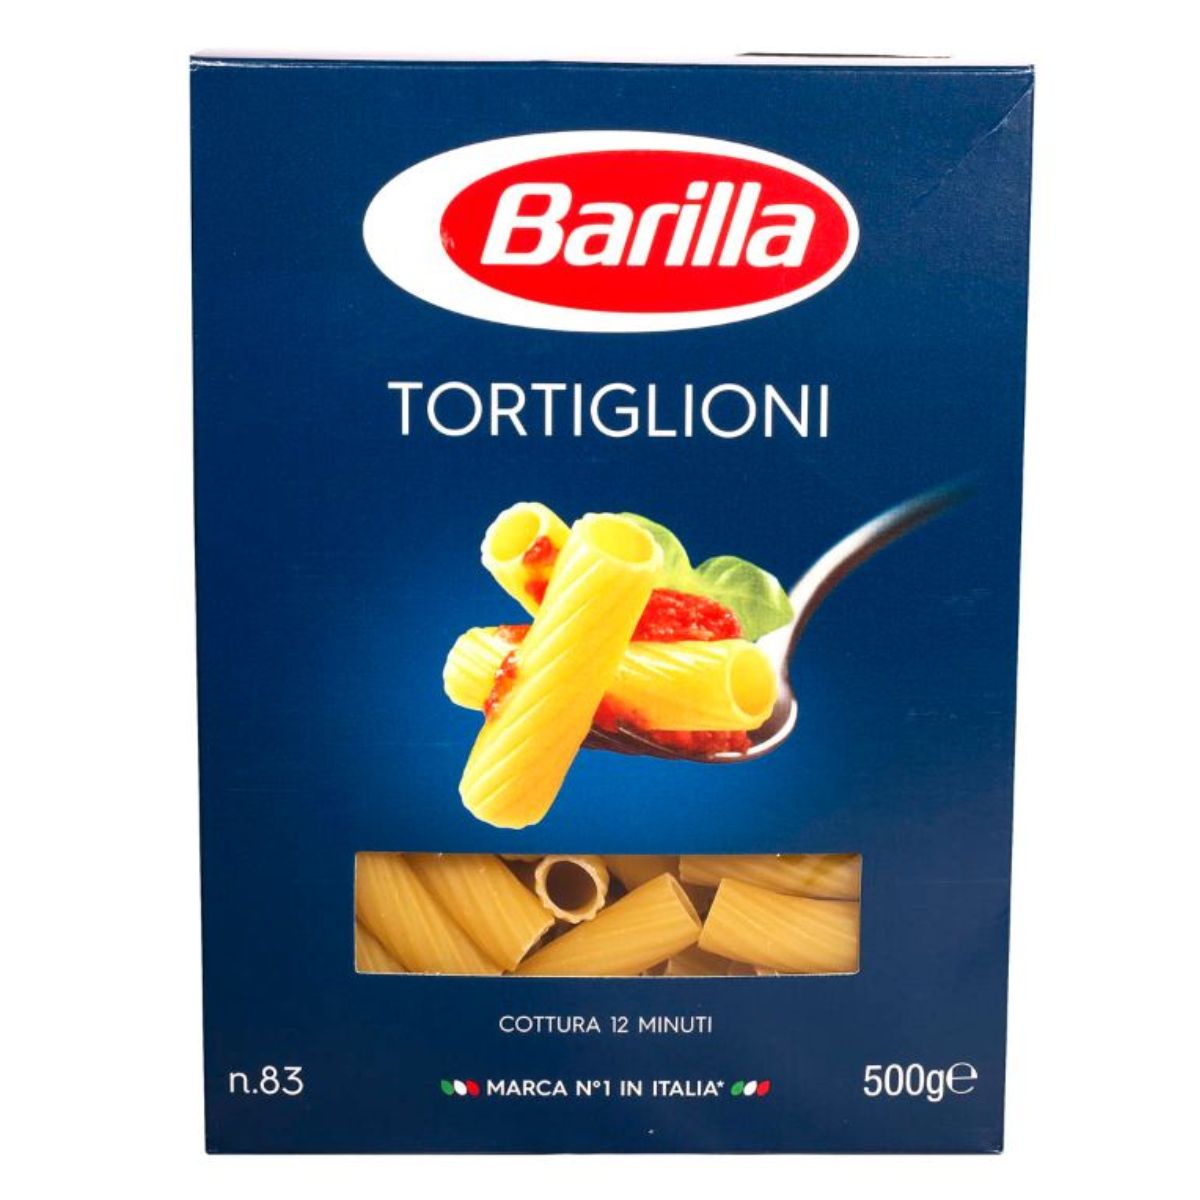 Sentence with replaced product name: Box of Barilla - Pasta Tortiglioni - 500g, featuring an image of the pasta with tomatoes and basil on a fork.